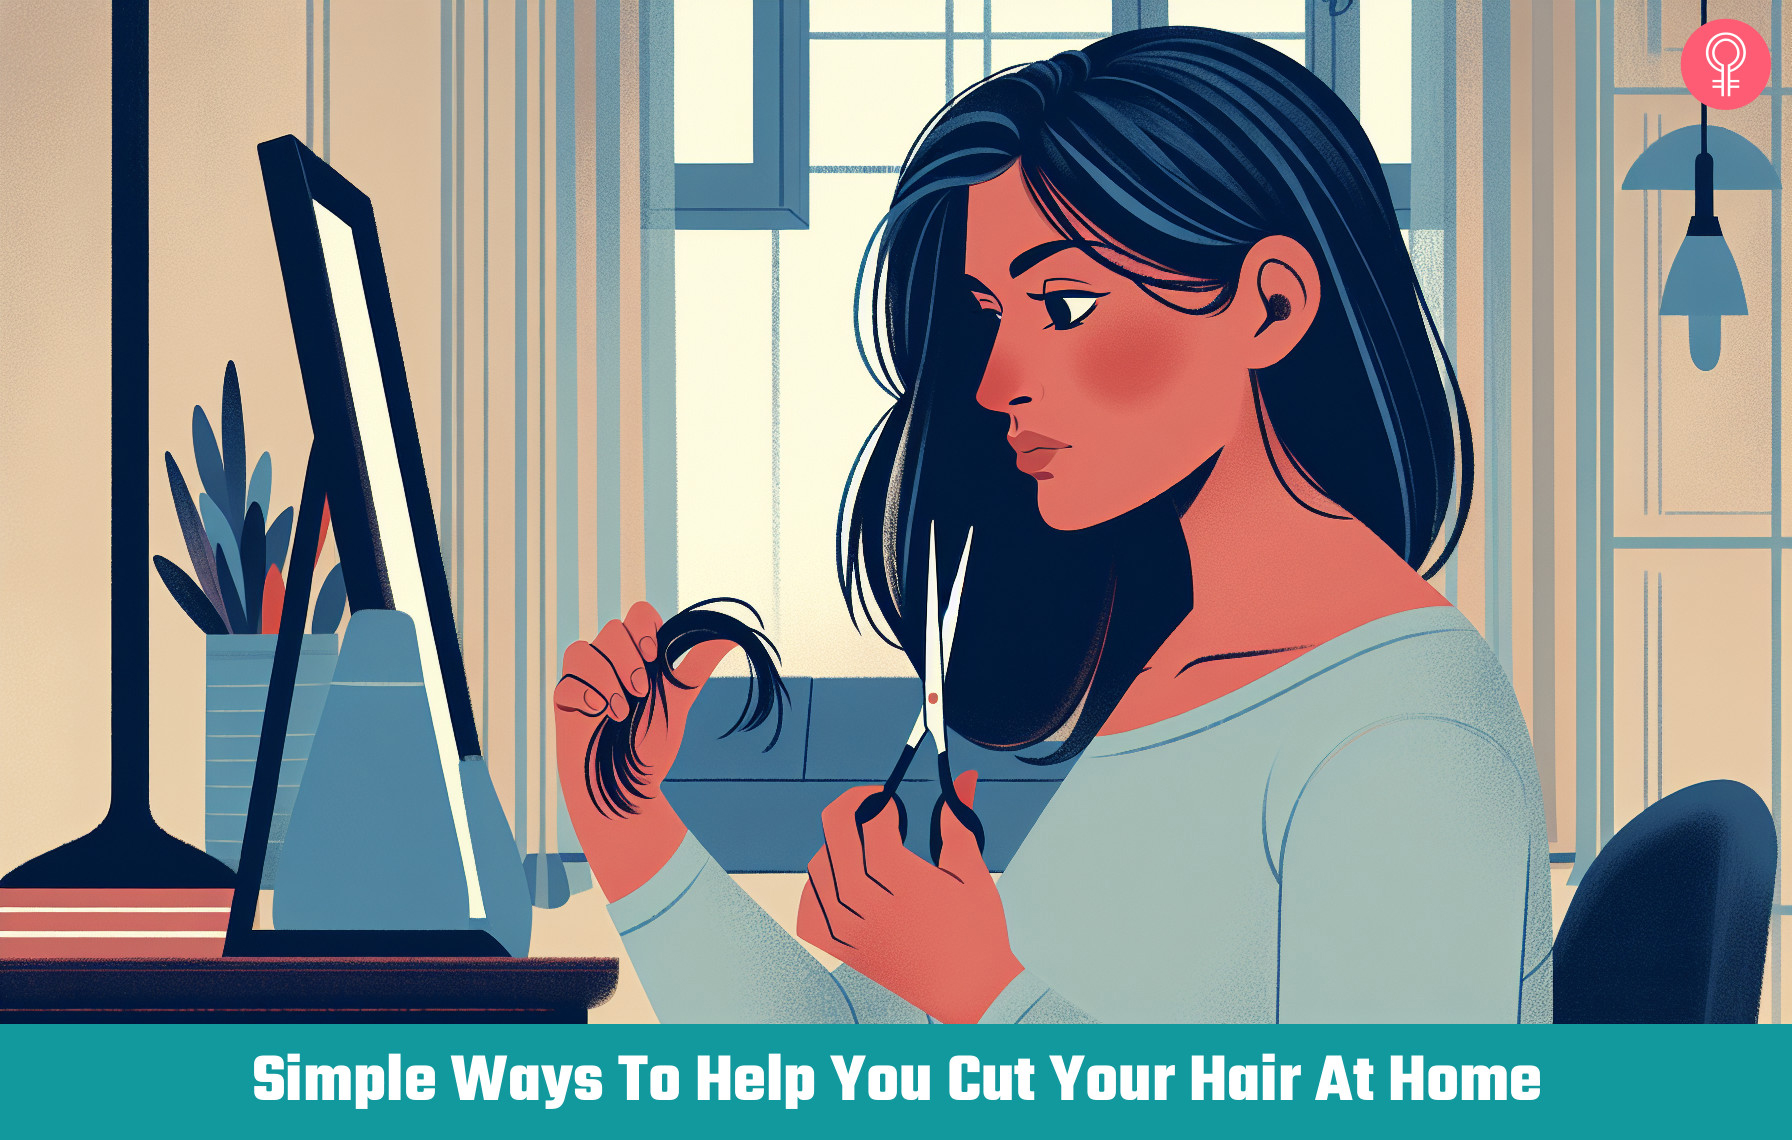 10 Simple Ways To Help You Cut Your Hair At Home